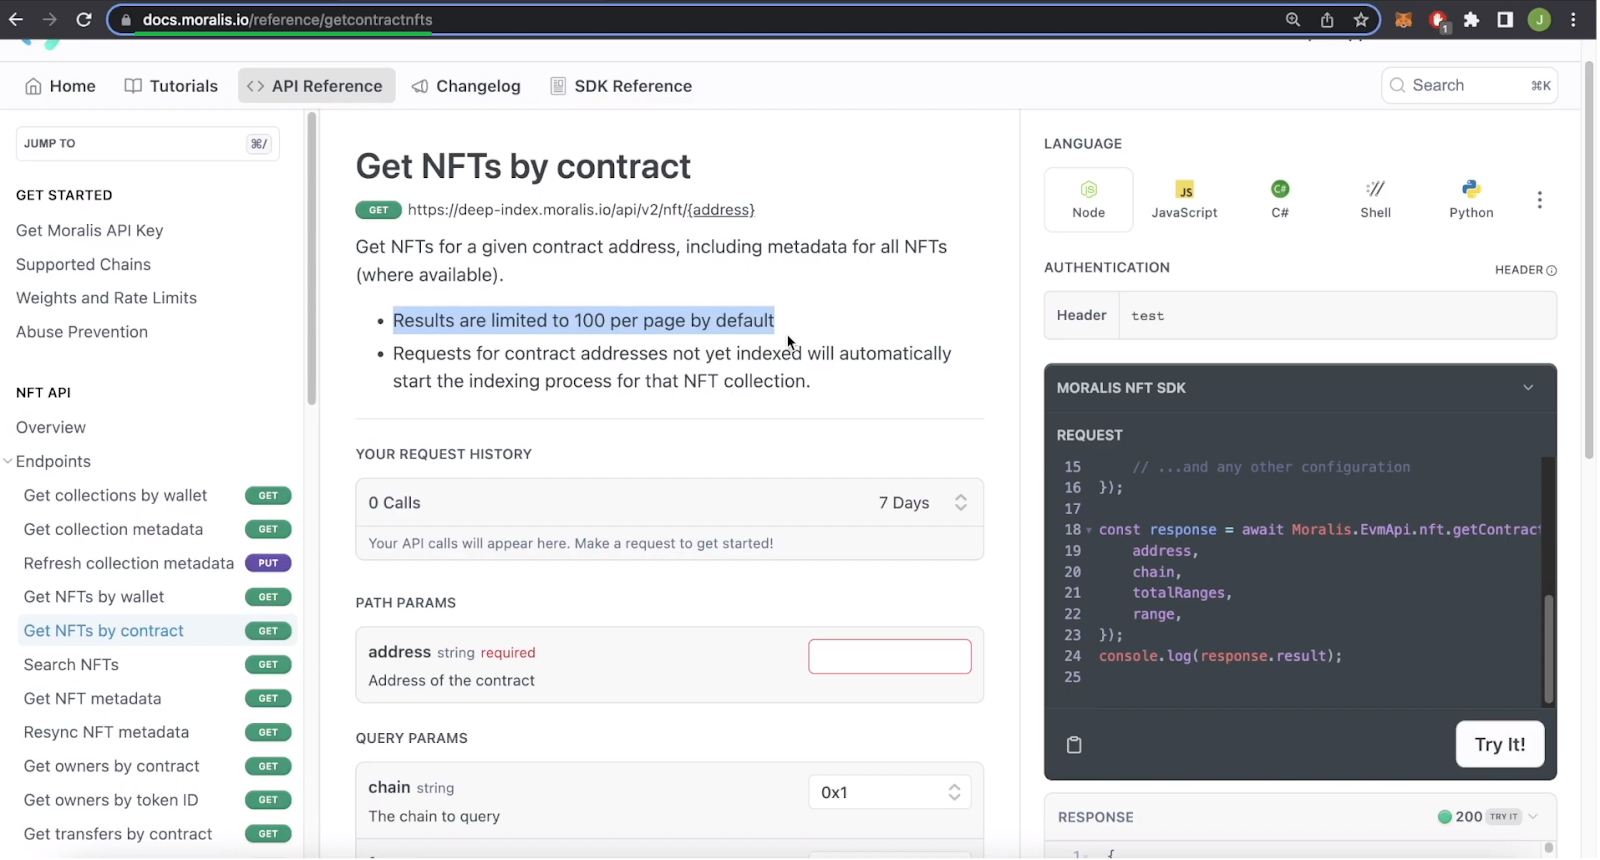 Documentation page with code snippets for the getContractNFTs endpoint to get all NFTs from contract.